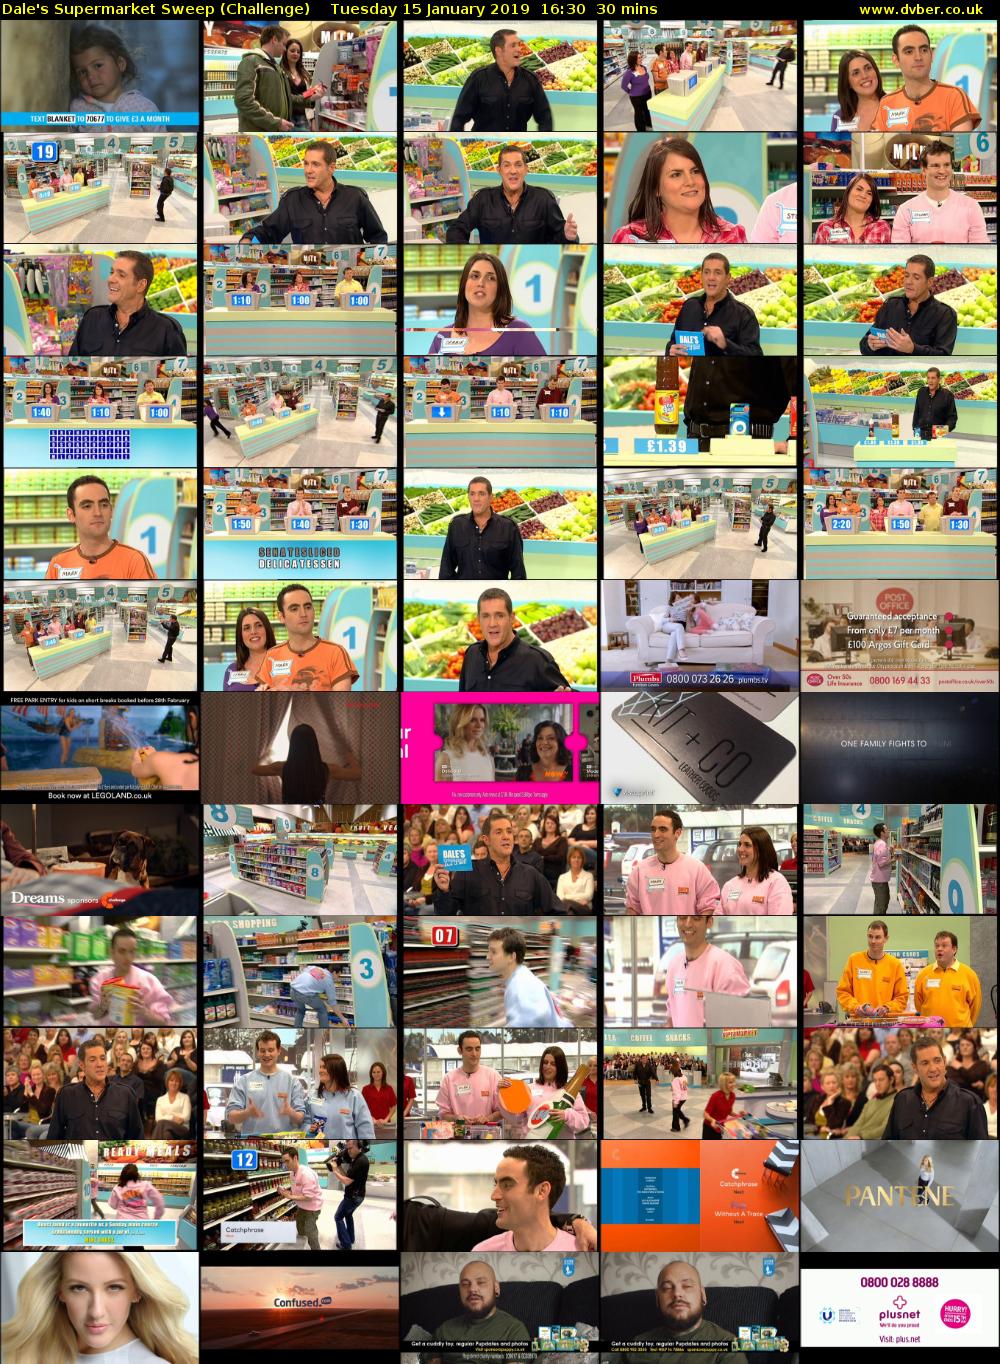 Dale's Supermarket Sweep (Challenge) Tuesday 15 January 2019 16:30 - 17:00